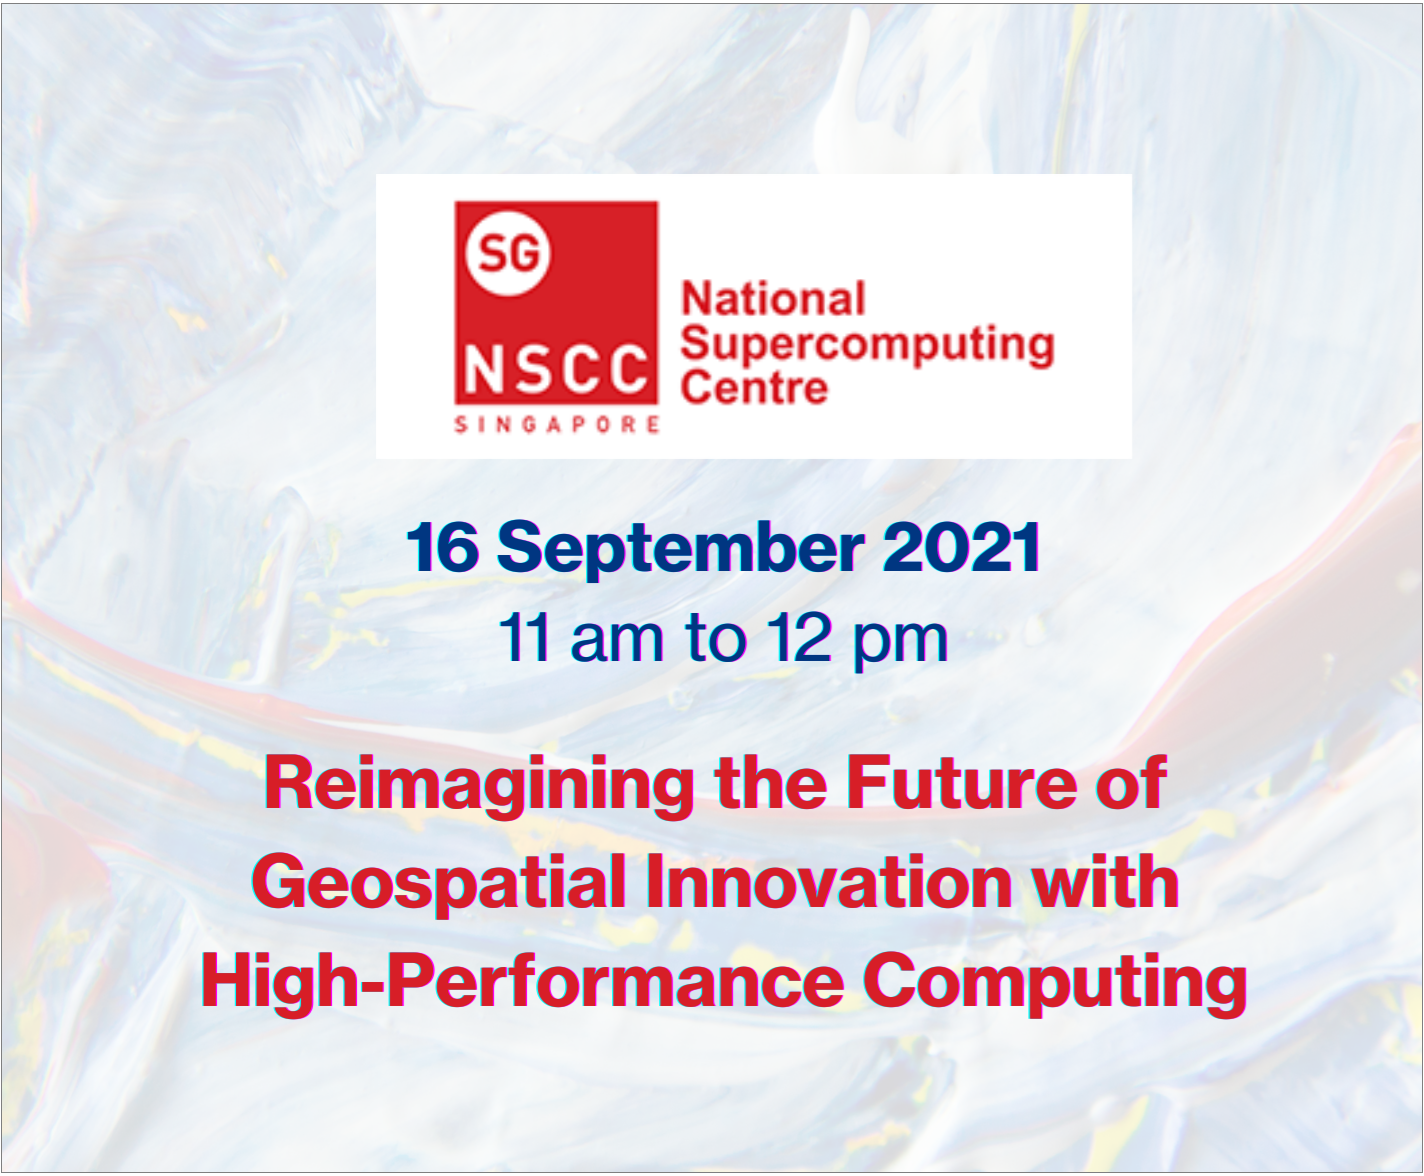 Reimagining the Future of Geospatial Innovation with HPC